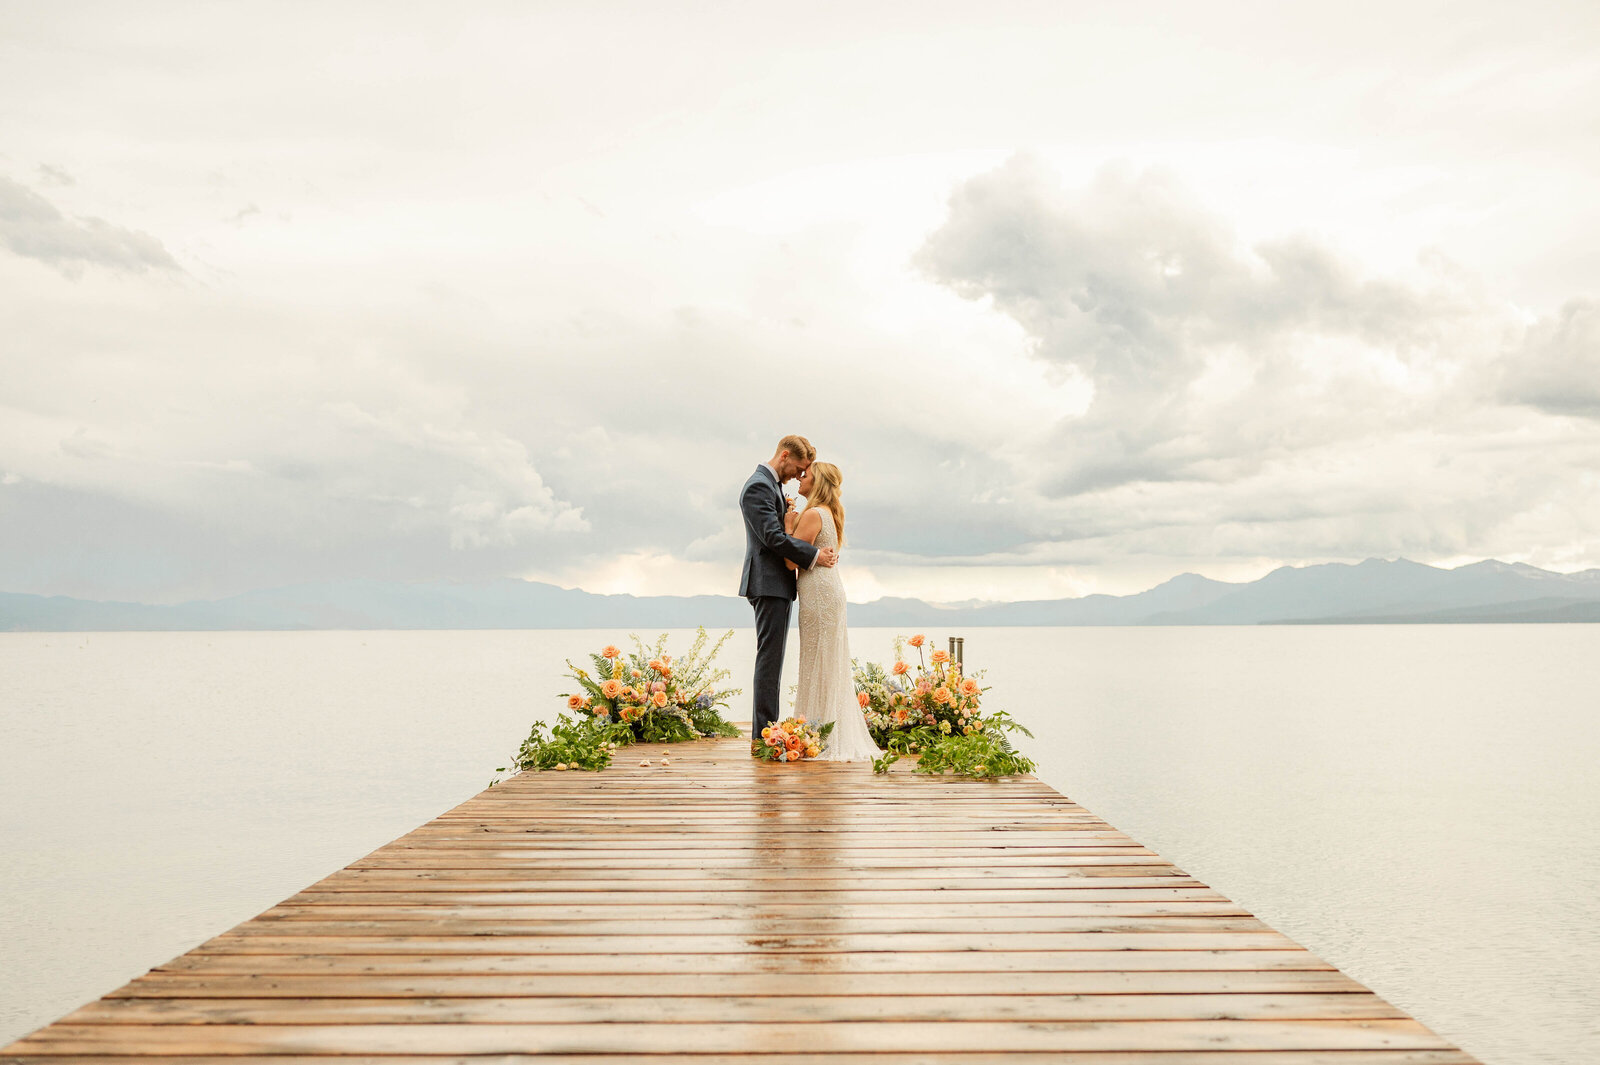 A couple getting married on a pier in Lake Tahoe